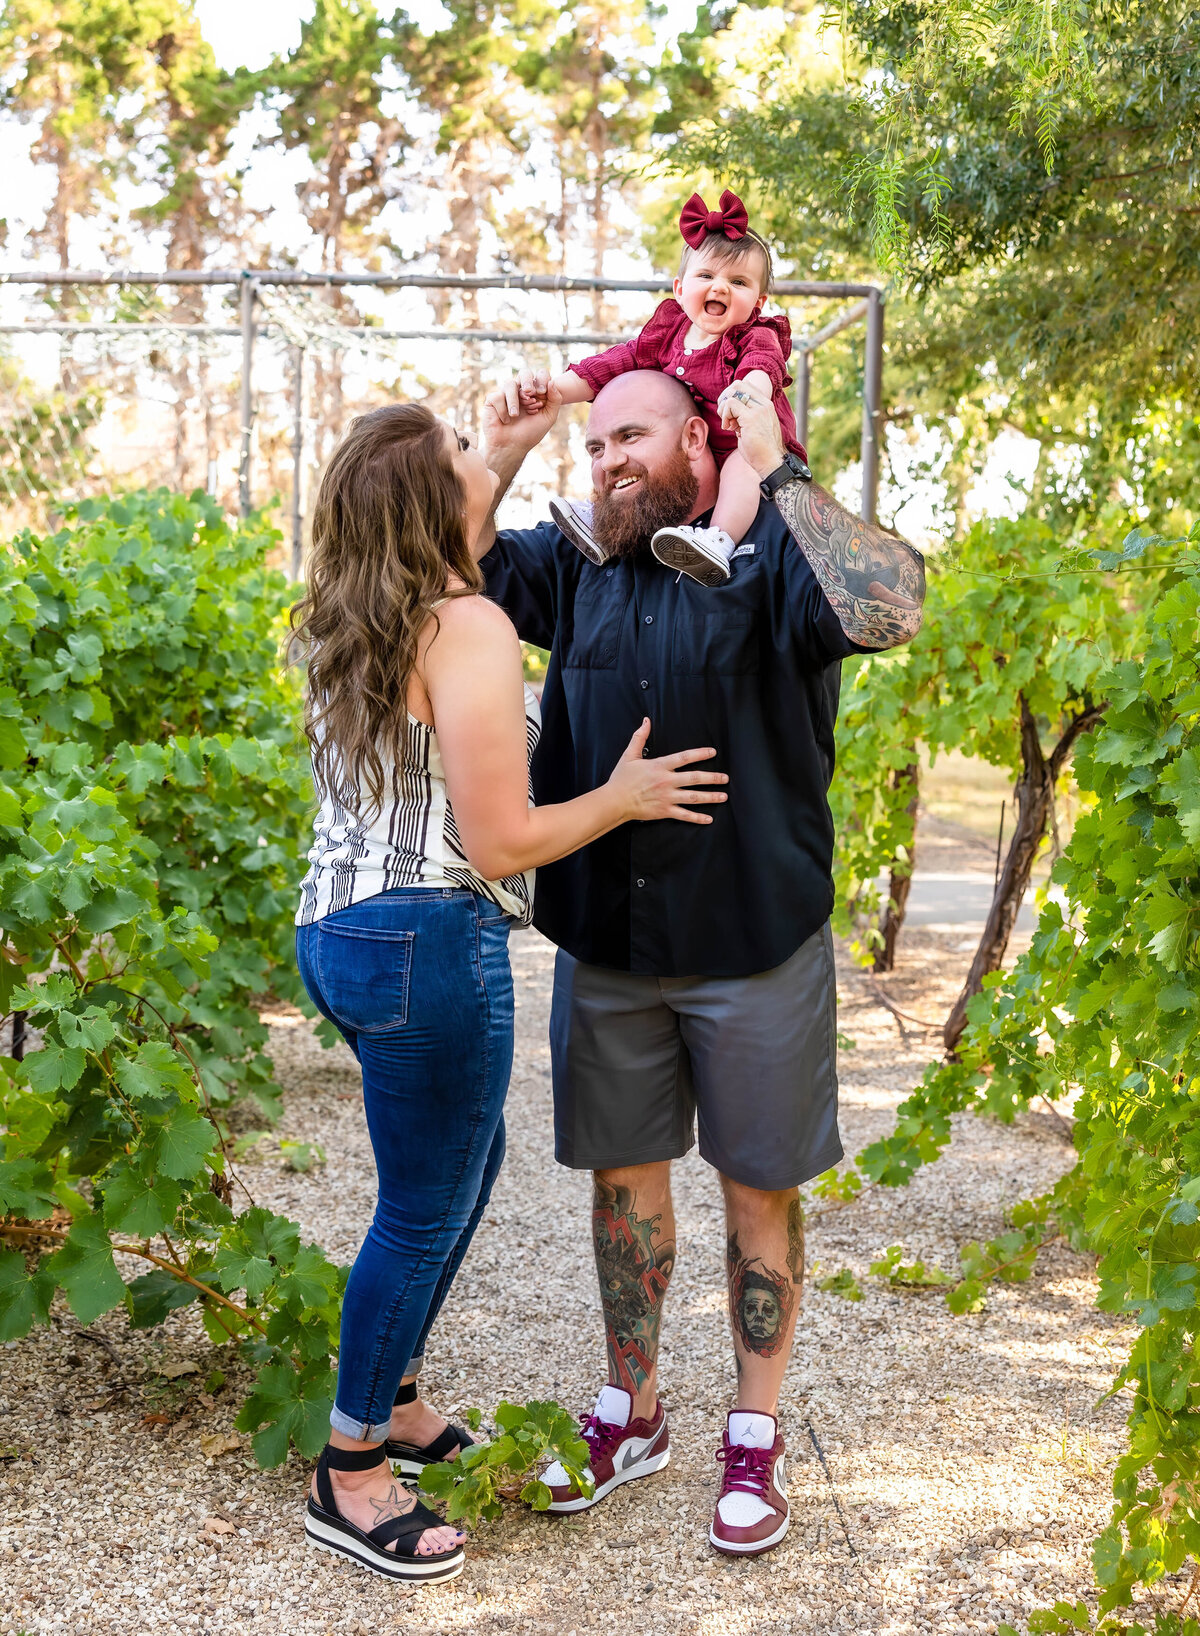 Family is posed in a vineyard with mom and dad looking at each other and baby is looking at the camera.  Dad is wearing a black shirt and shorts and mom is wearing a striped sleeveless shirt with jeans and sandals.  Baby is in a maroon romper with a matching hairbow